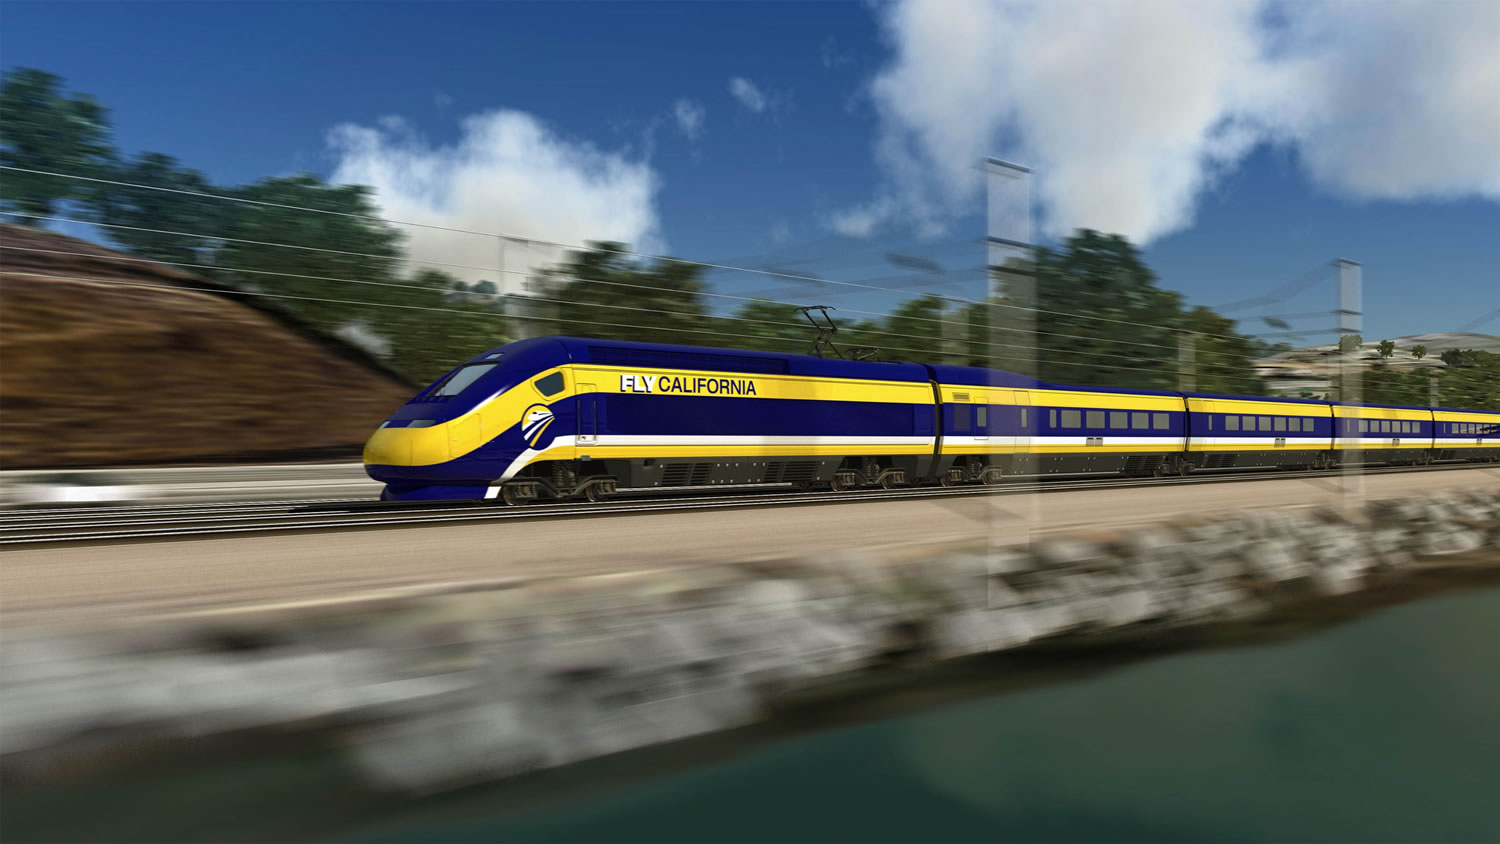 An artist's rendering shows a high-speed train traveling along the California coast.